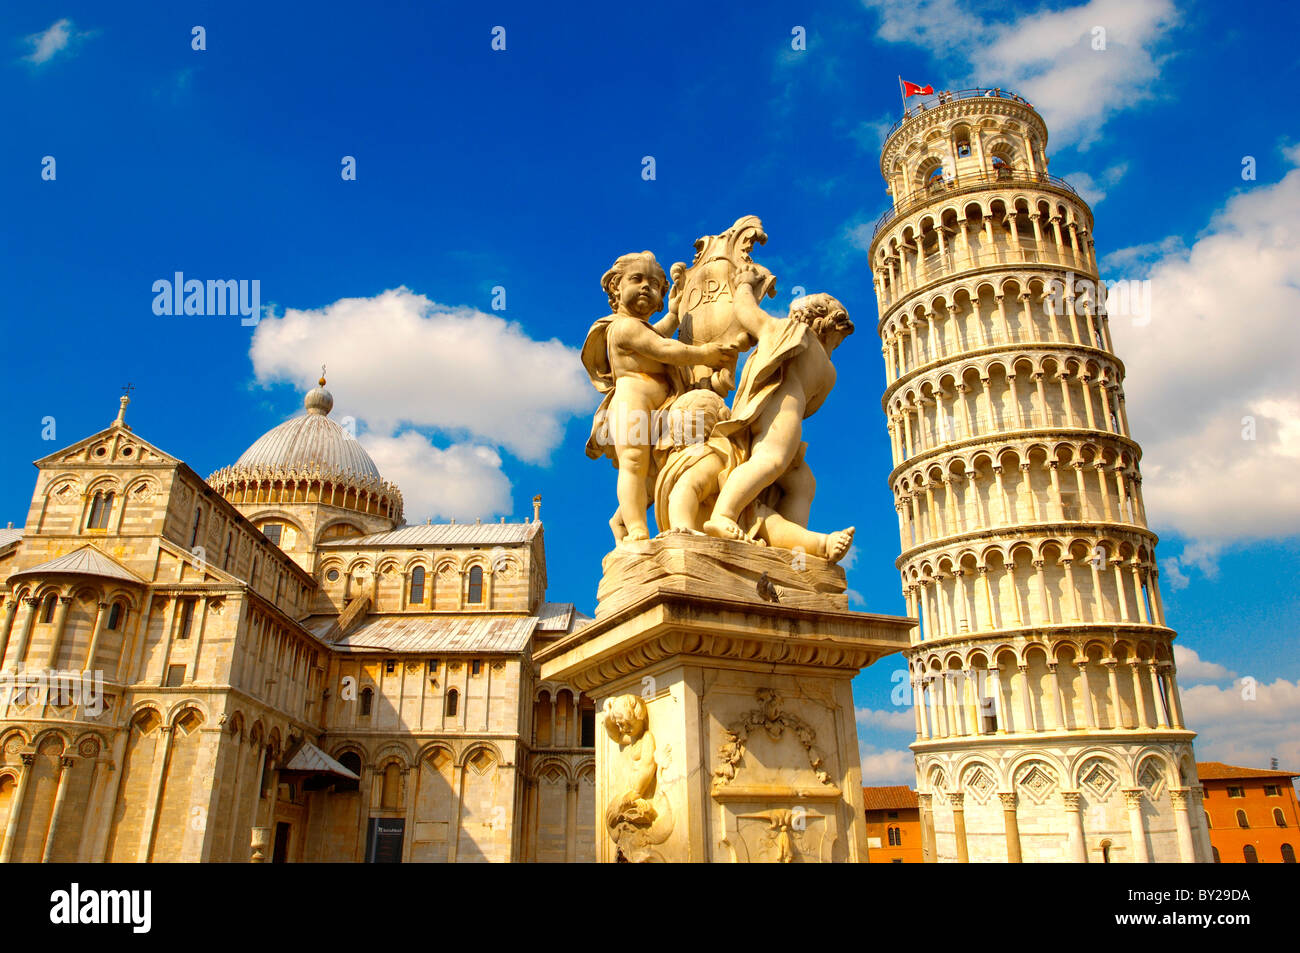 Catherderal and Leaning Tower - Piazza del Miracoli - Pisa - Italy Stock Photo